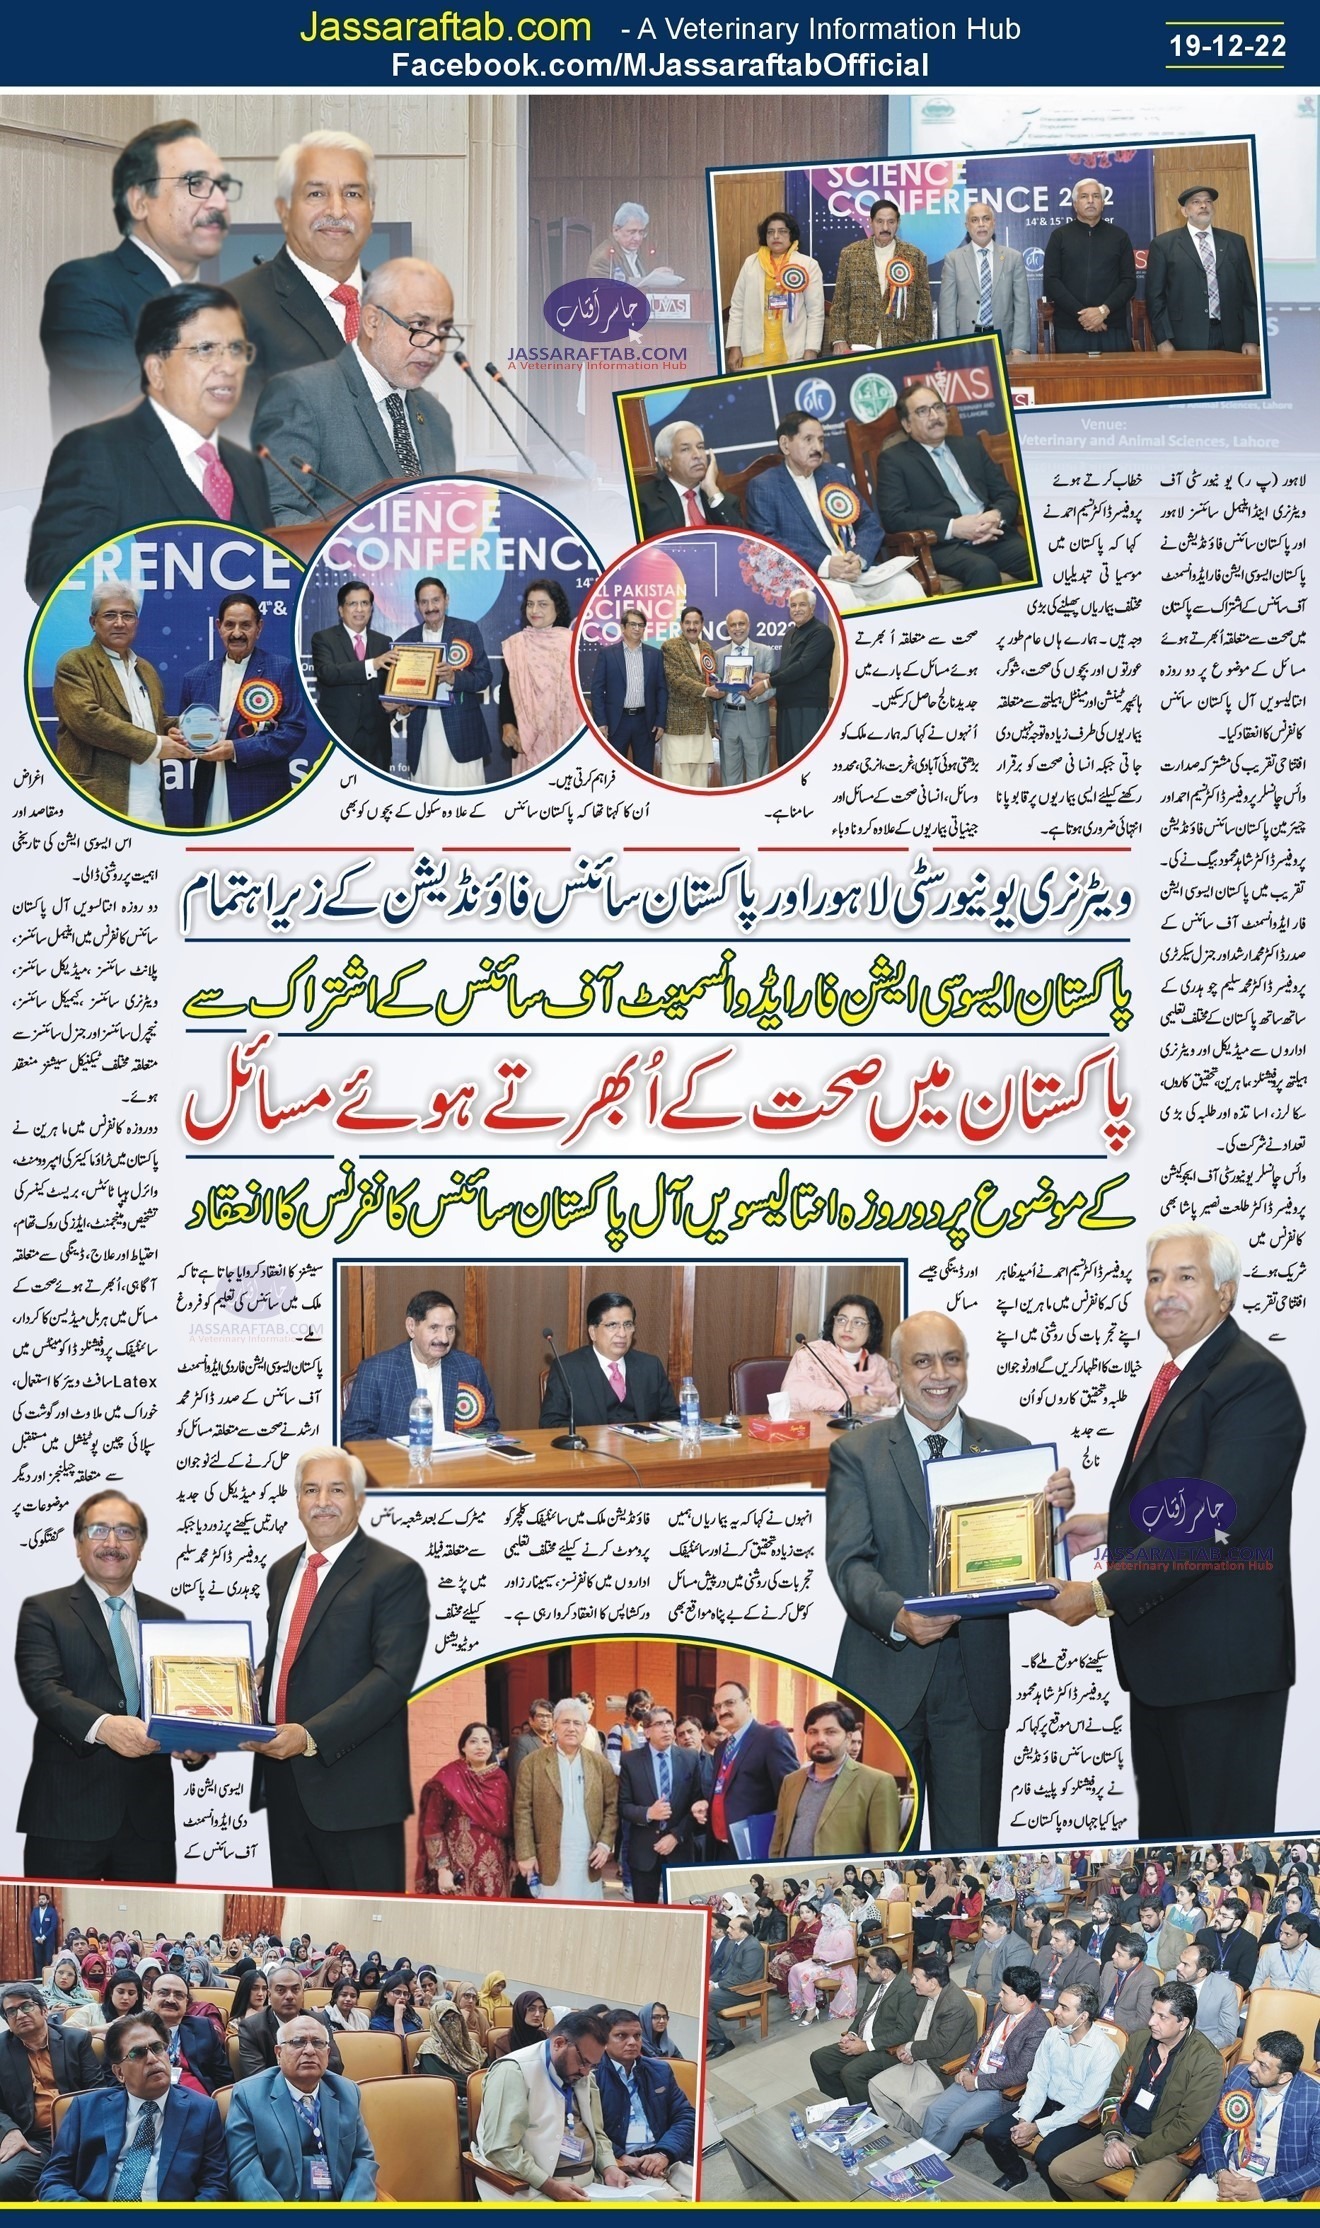 All Pakistan Science Conference held at UVAS by Pakistan Science Foundation on emerging health issues in Pakistan.